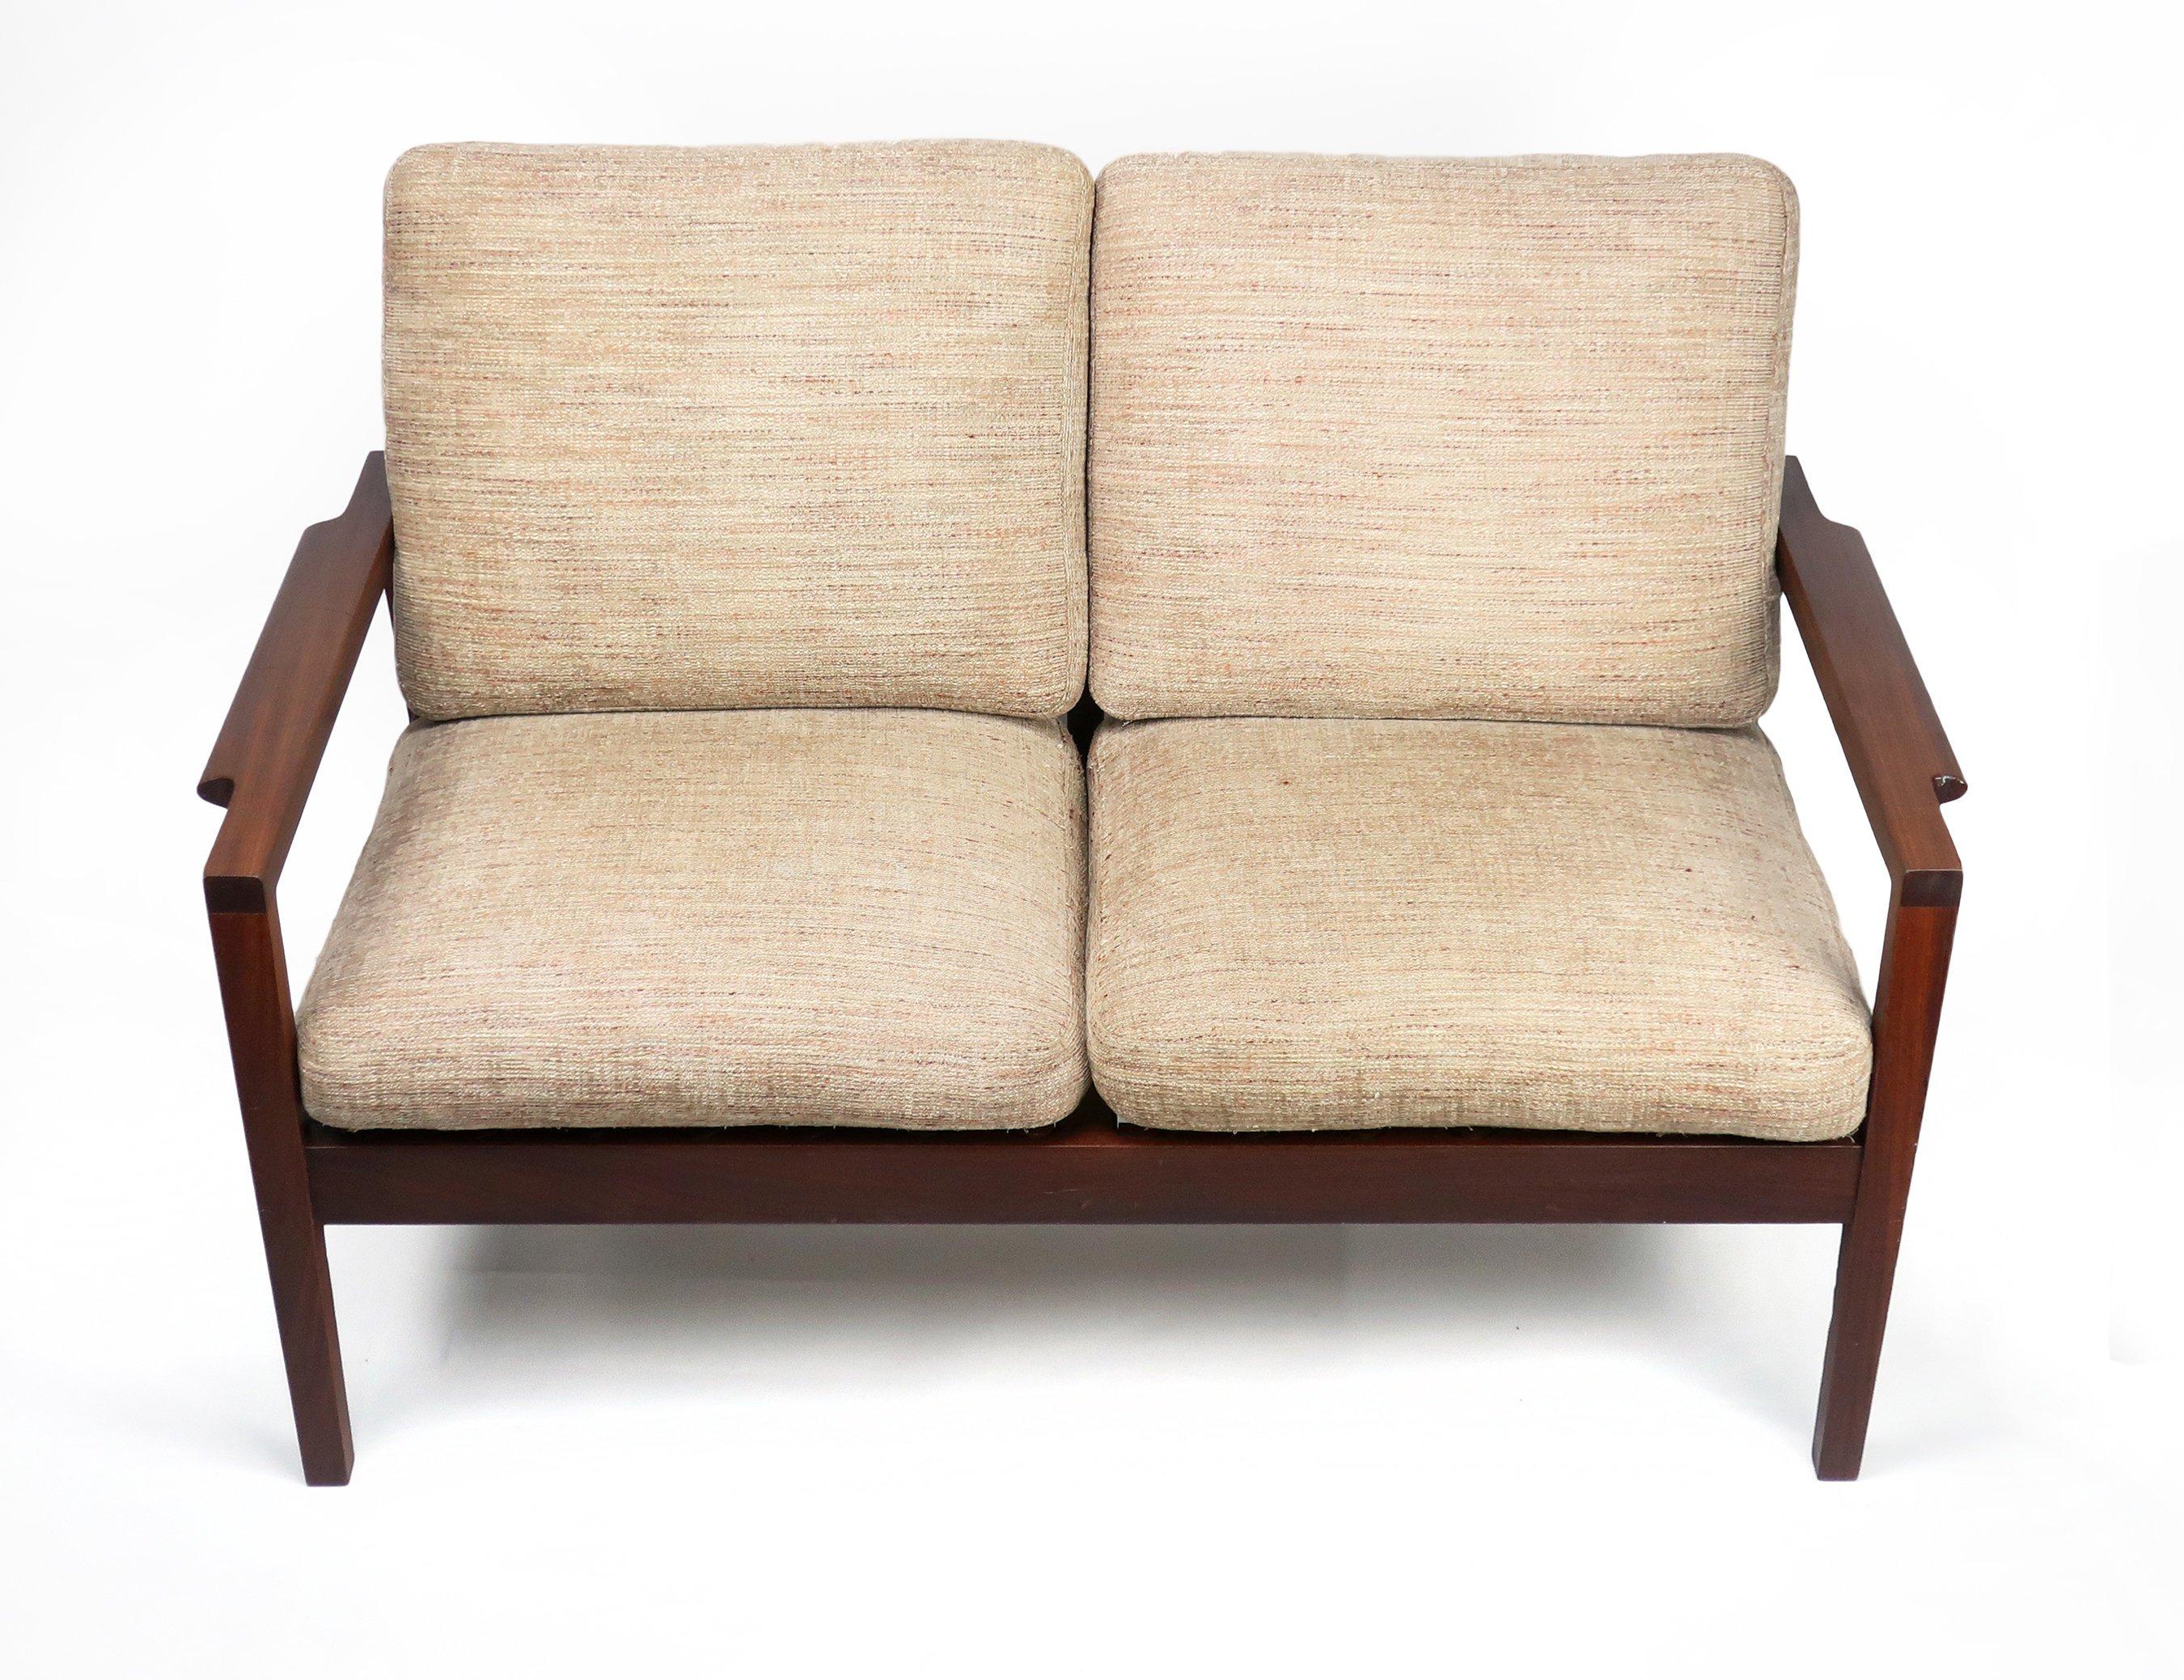 A lovely two seat teak couch by Canadian modern furniture maker RS Associates of Montreal. Frame is the rich reddish brown of midcentury teak furniture and the soft tan upholstery has traces of brown, red and green and sits on rubberized metal seat